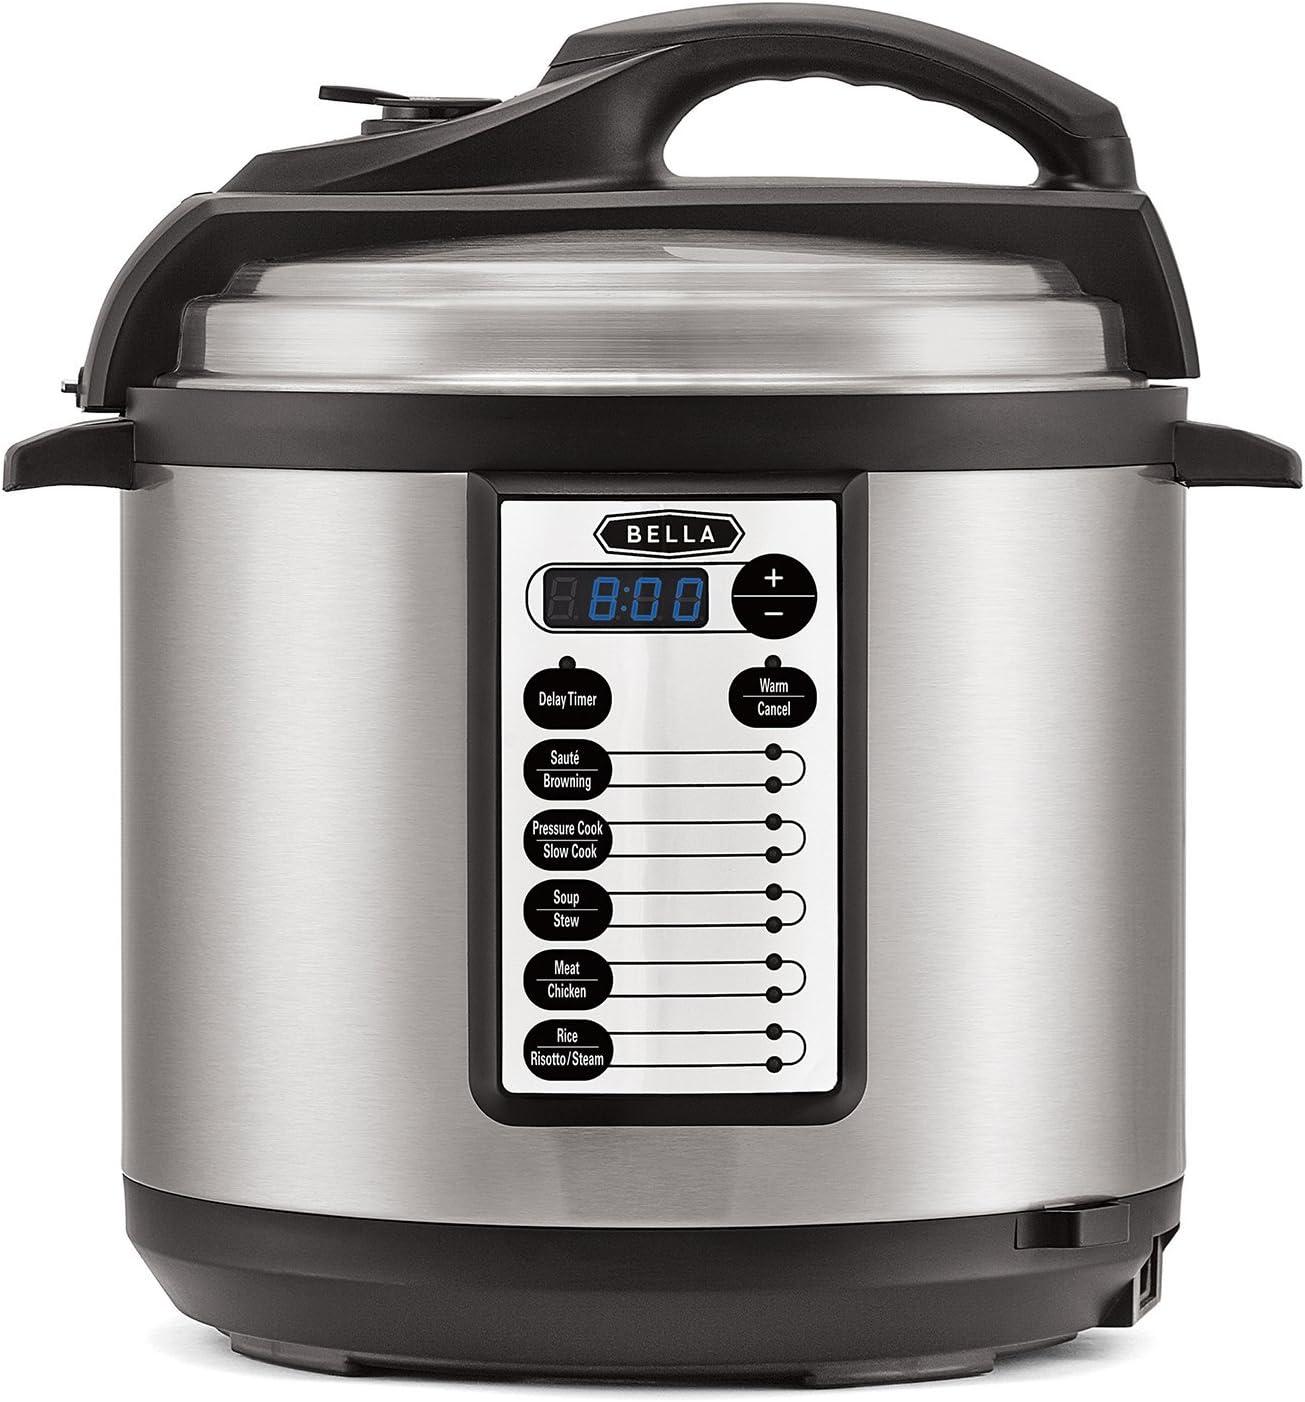 Electric and stovetop pressure cookers